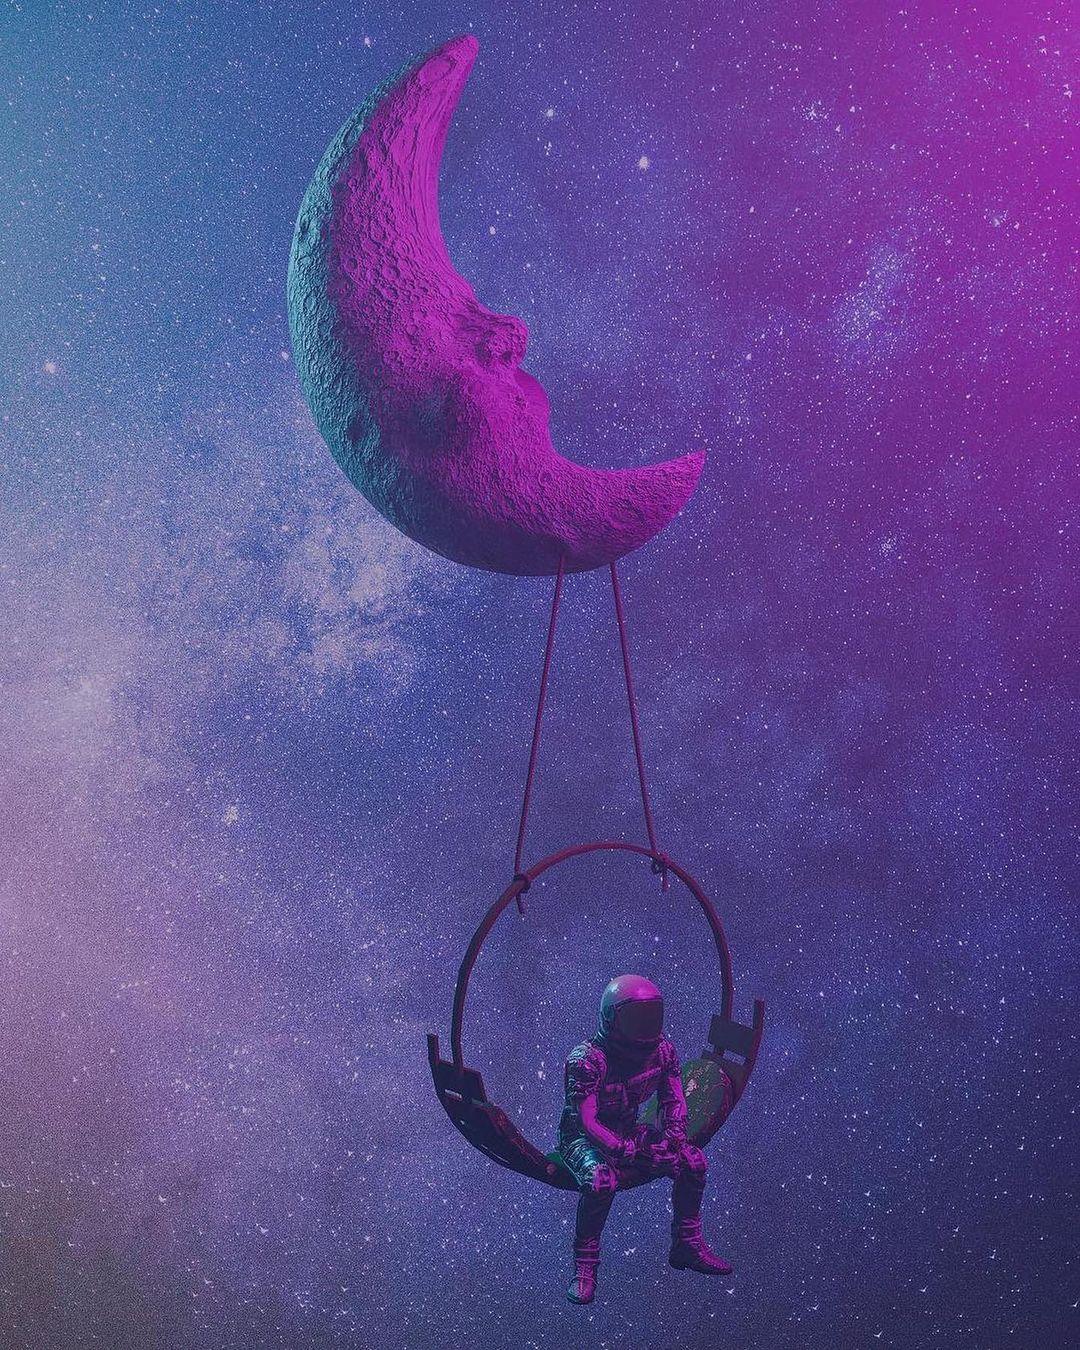 class="content__text"
 SWING MOON 🌙🔭

Do you love this Photo? ❤

Are you ready to explore Deep Space 🔭
@TheOurDeepSpace 

Image credit: @bevisualz